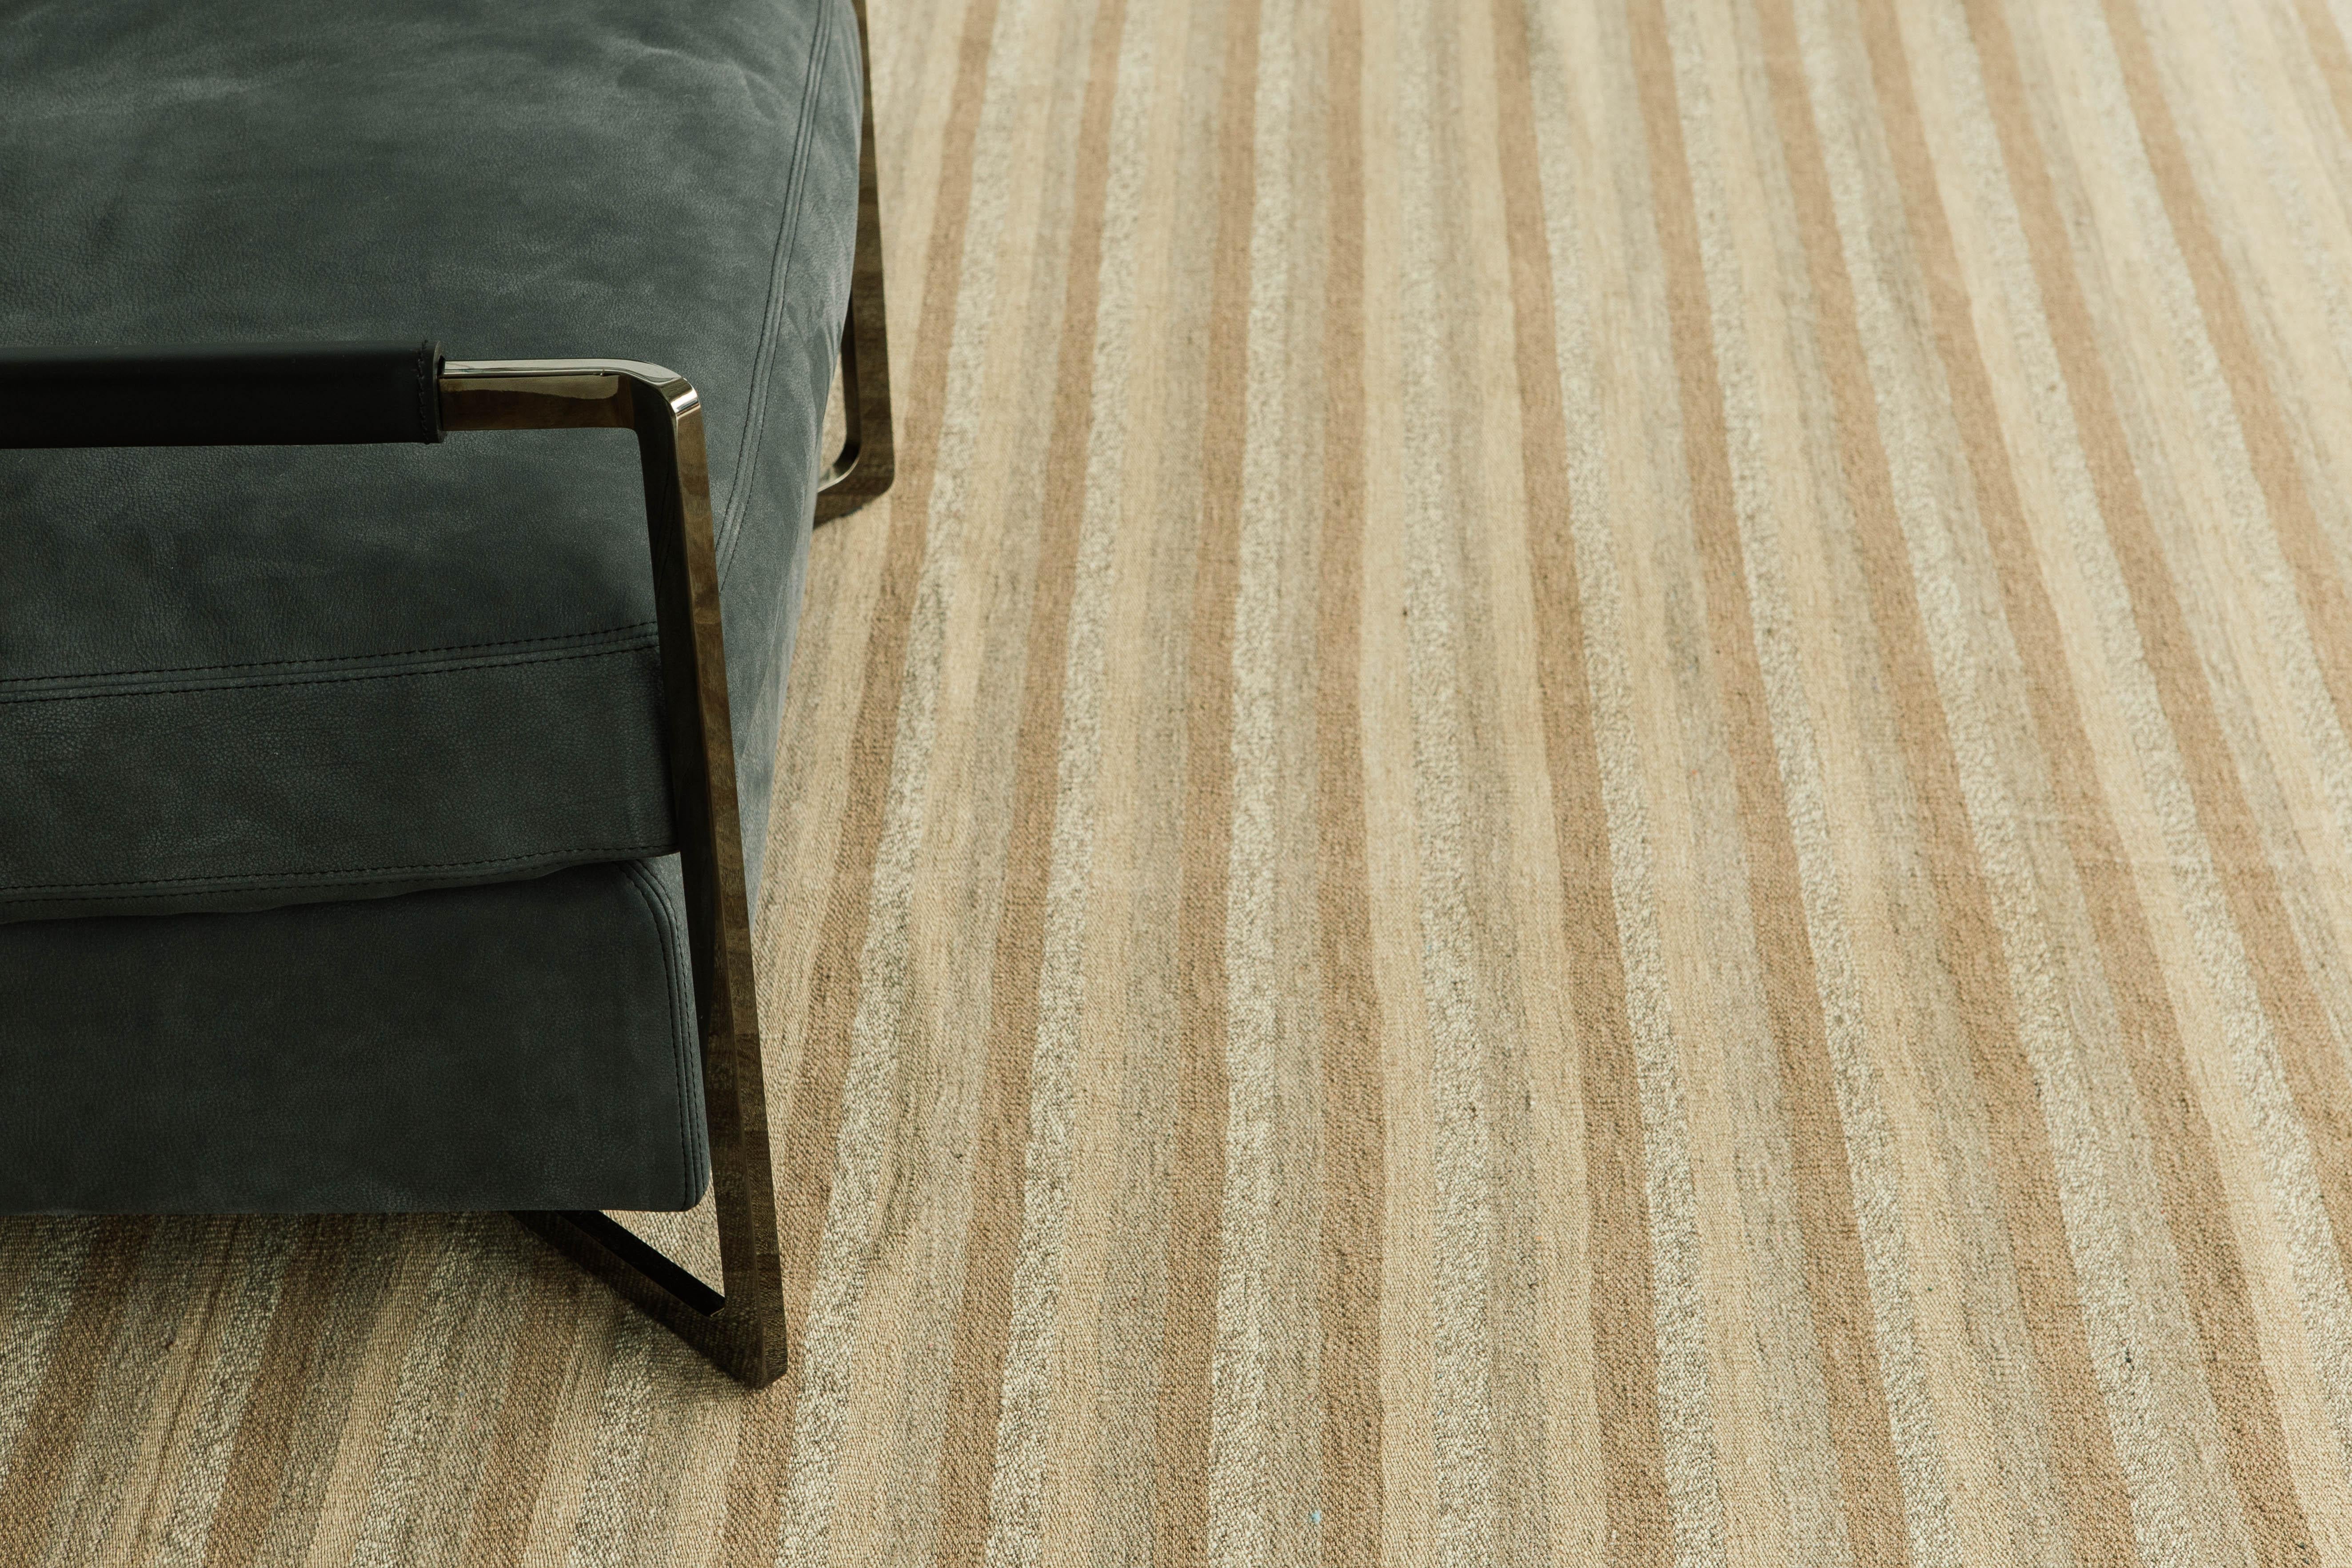 A natural dye flat-weave Kilim in a neutral stripe pattern. This flat-weave is made up of natural wool that create an interesting texture and vibe. A simple yet interesting rug that will elevate any design space.

Rug number 24733
Size 8' 0